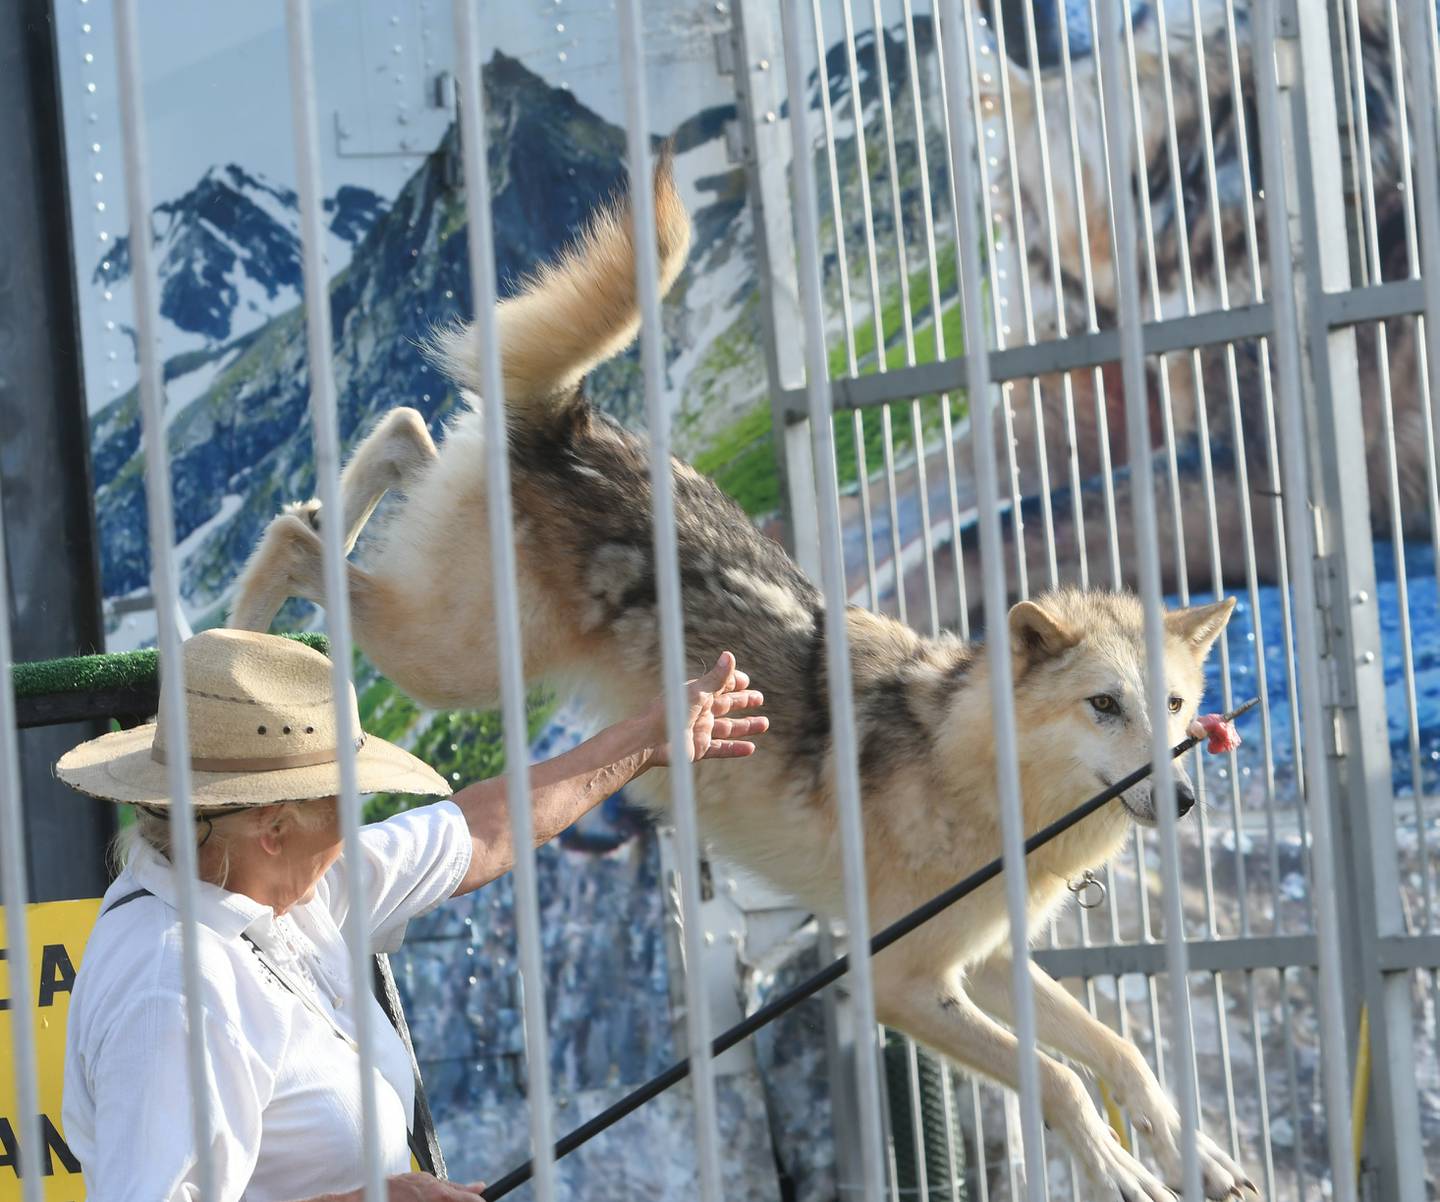 A wolf focuses on a piece of meet during the "Wolves of the World" show at the Ogle County Fair on Saturday, Aug. 6, 2022.